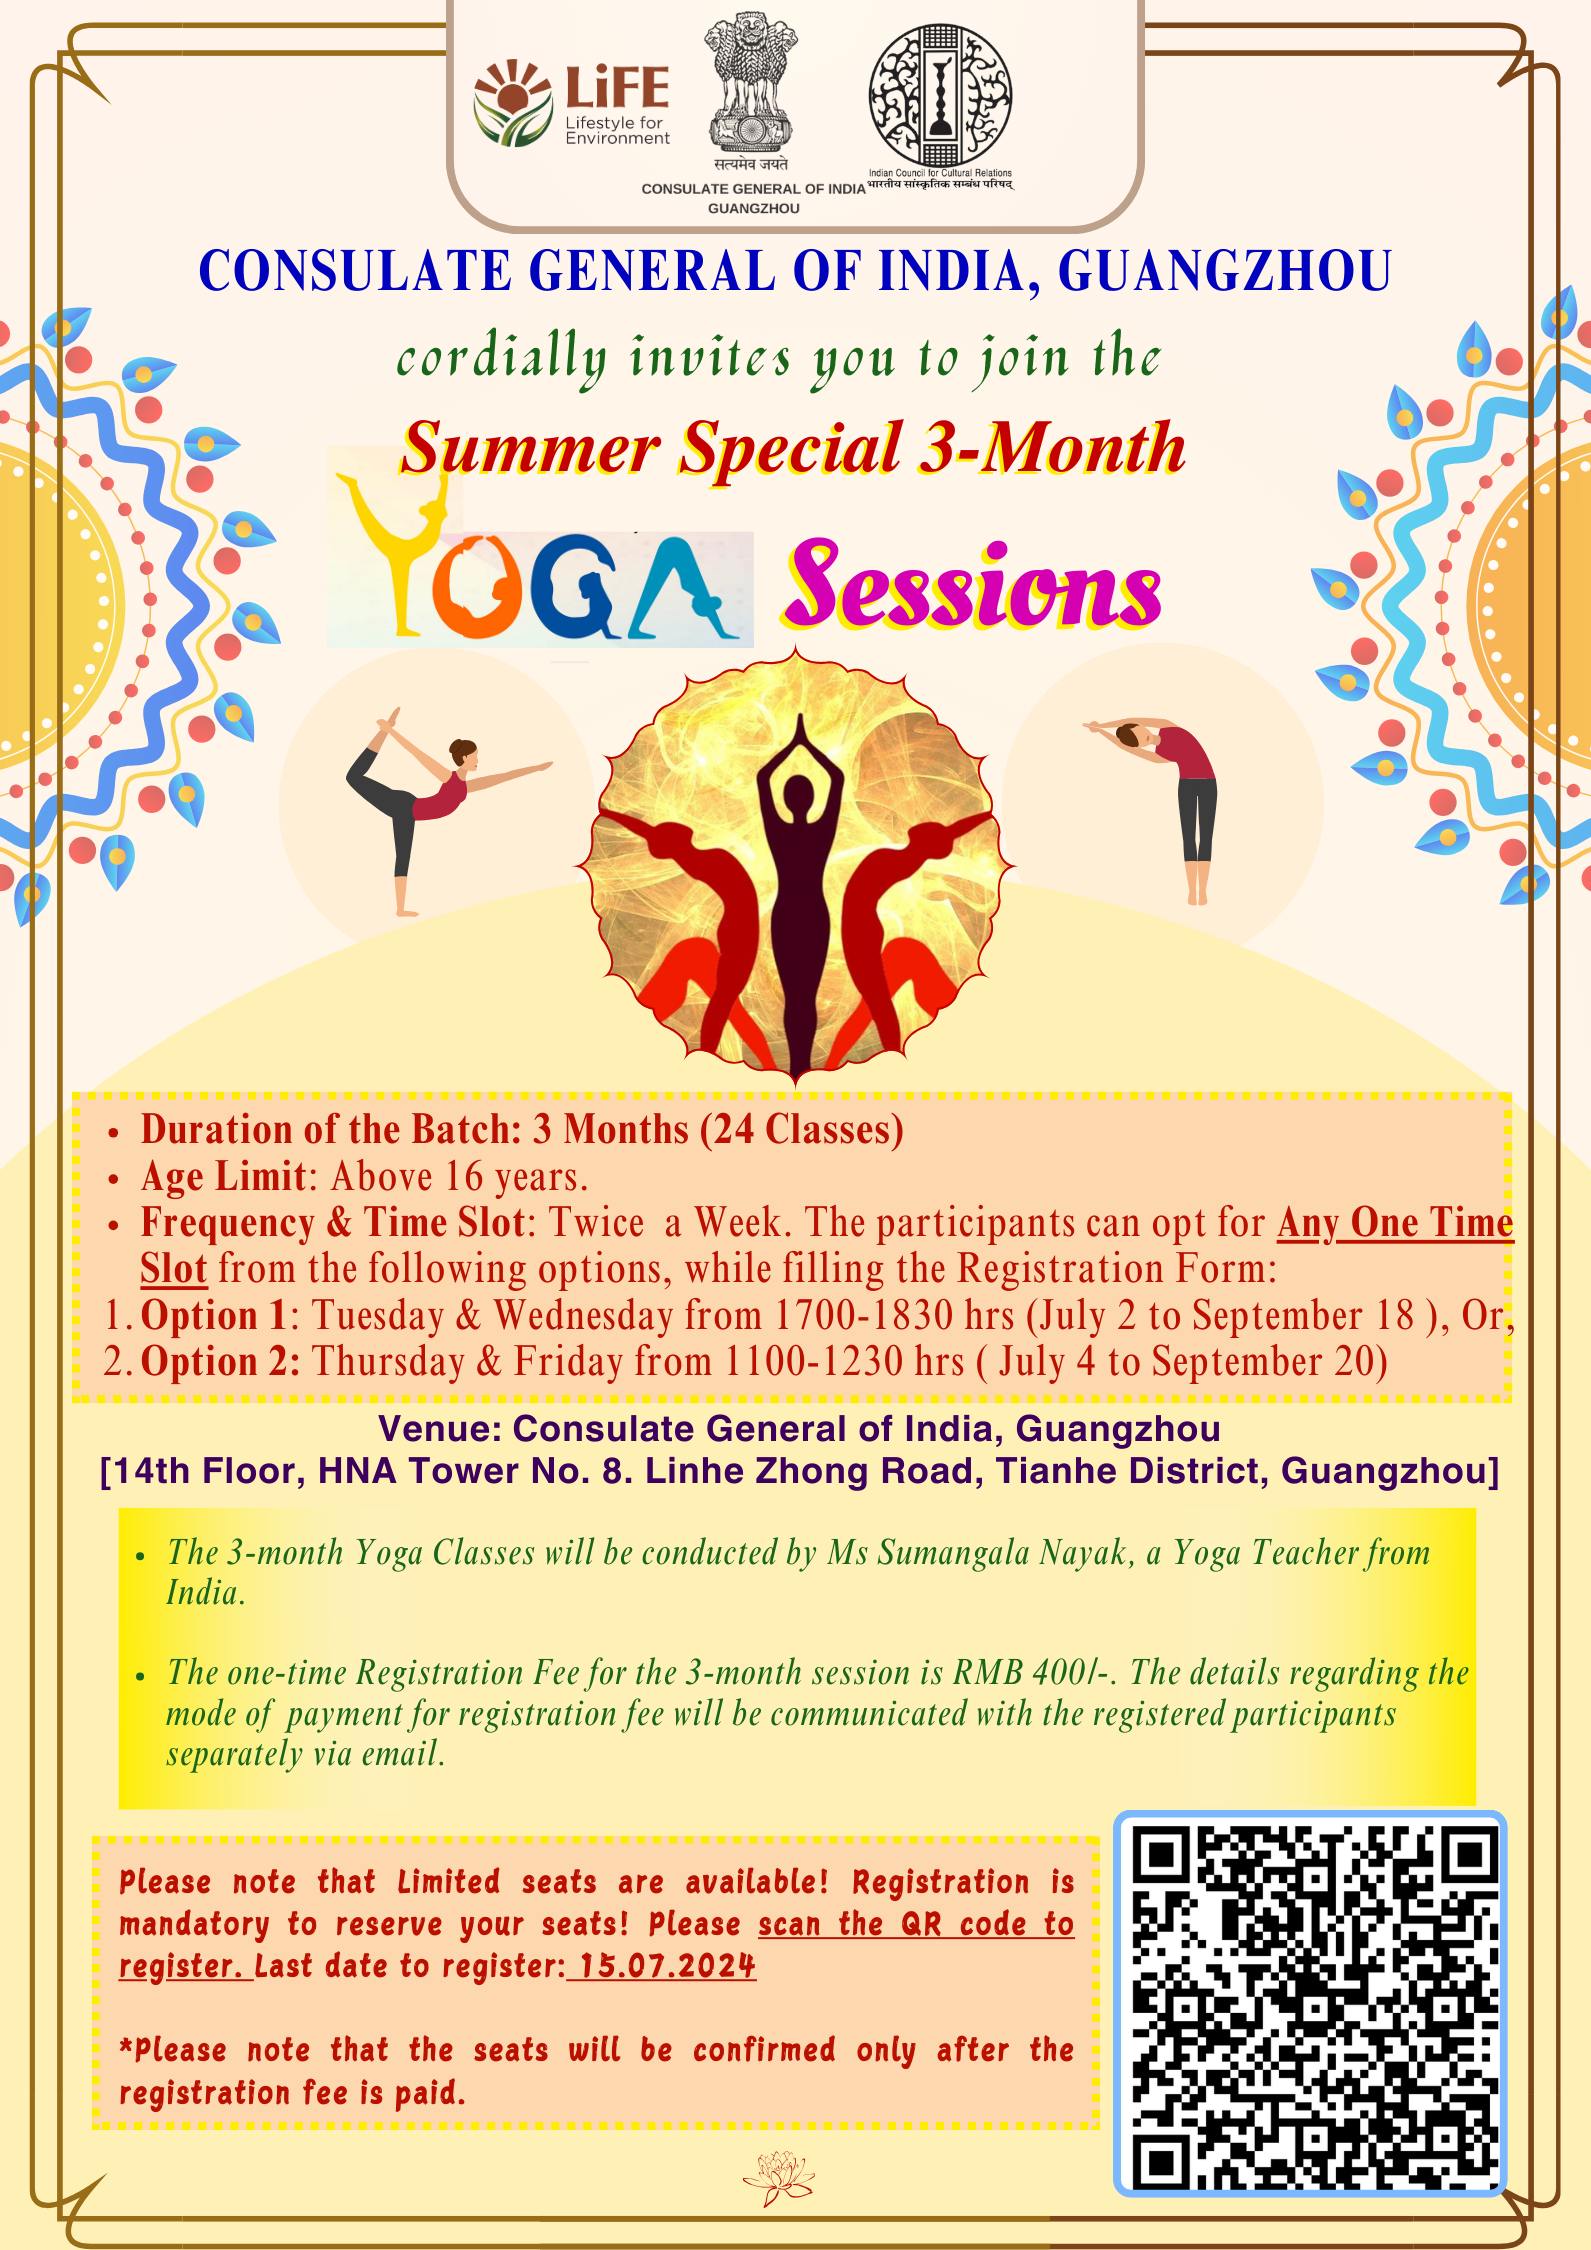 Invitation to attend the Yoga Sessions starting from 2 July 2024 at the Consulate General of India, Guangzhou.